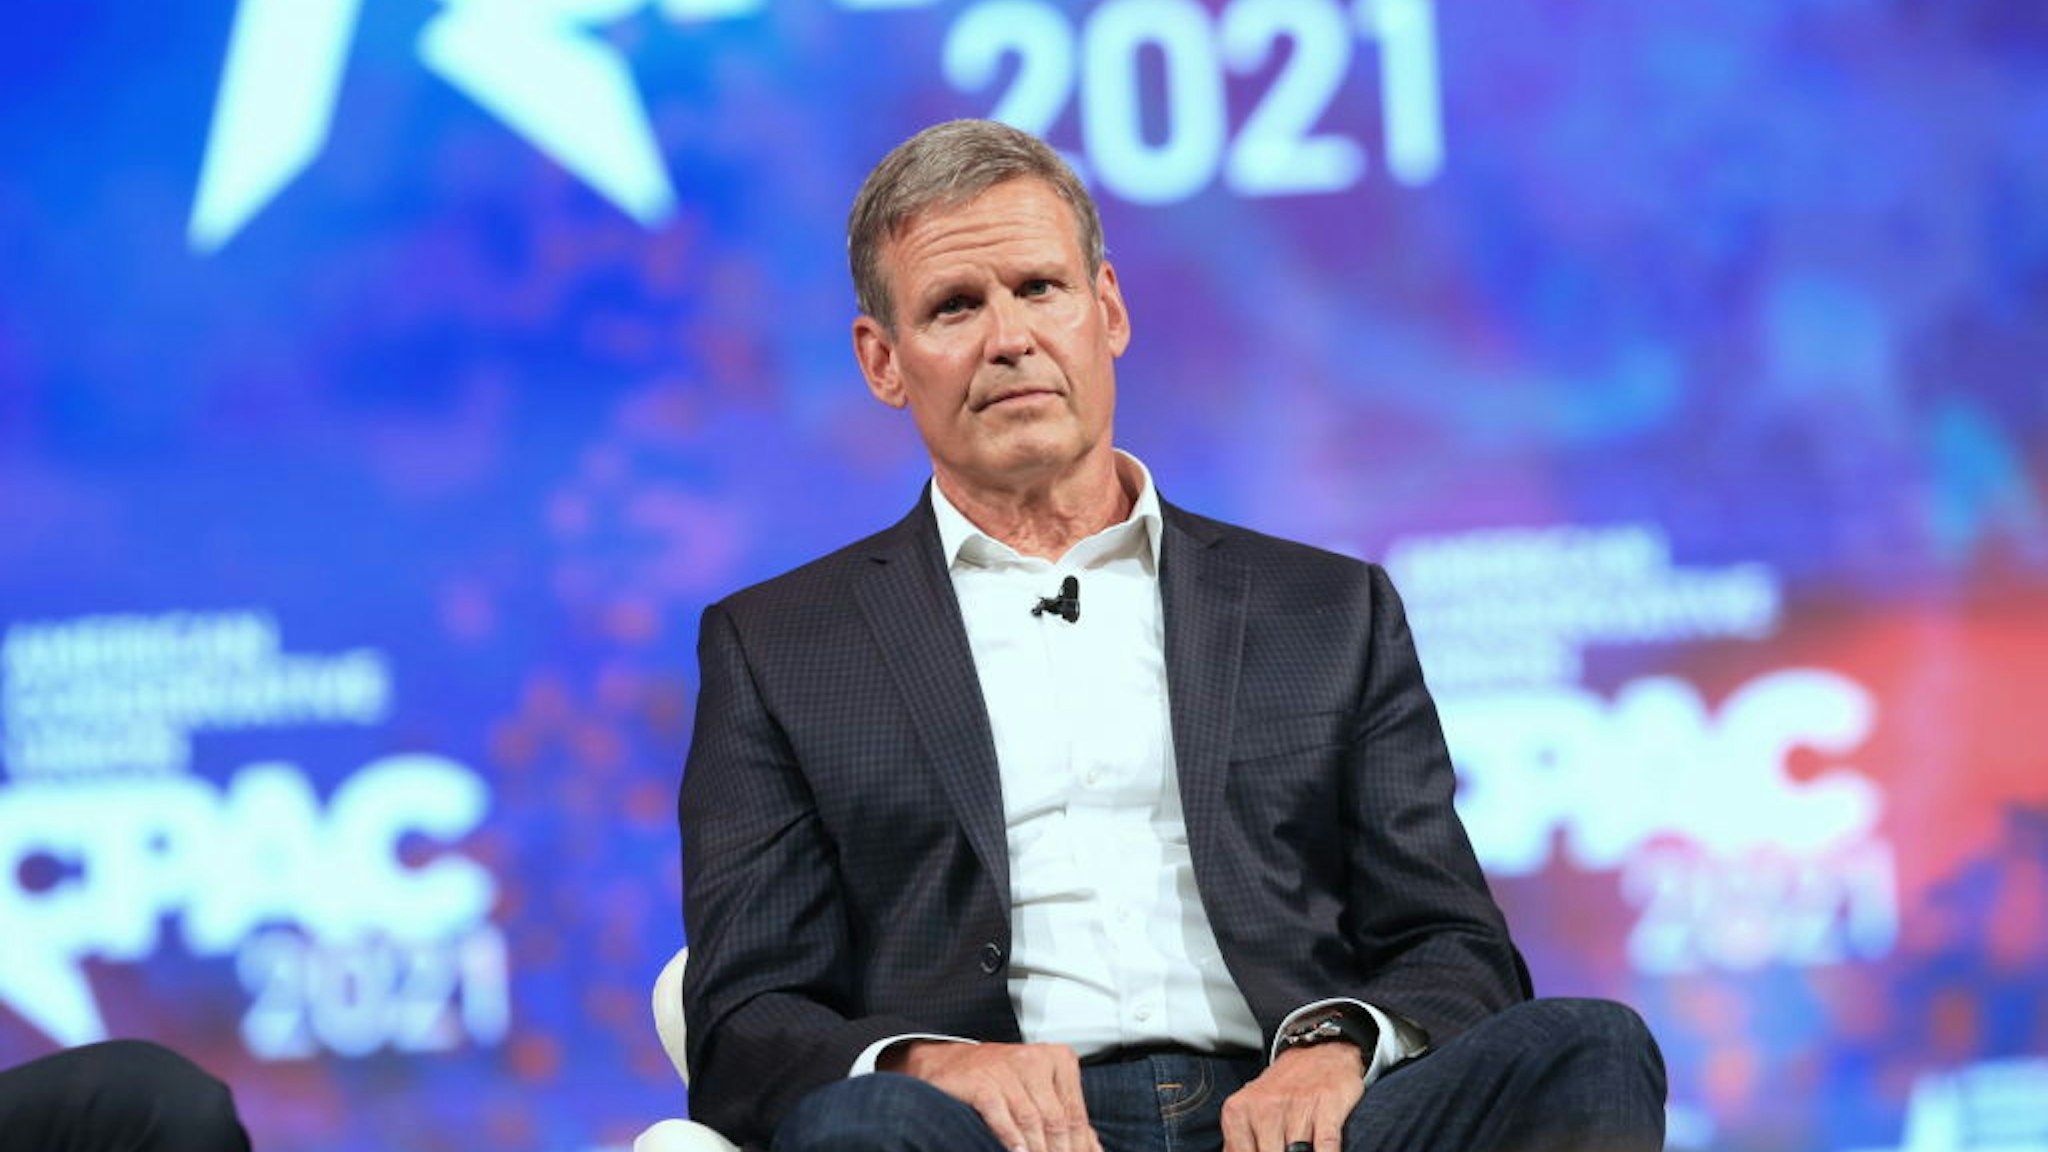 Bill Lee, governor of Tennessee, listens during the Conservative Political Action Conference (CPAC) in Dallas, Texas, U.S., on Saturday, July 10, 2021. The three-day conference is titled "America UnCanceled."